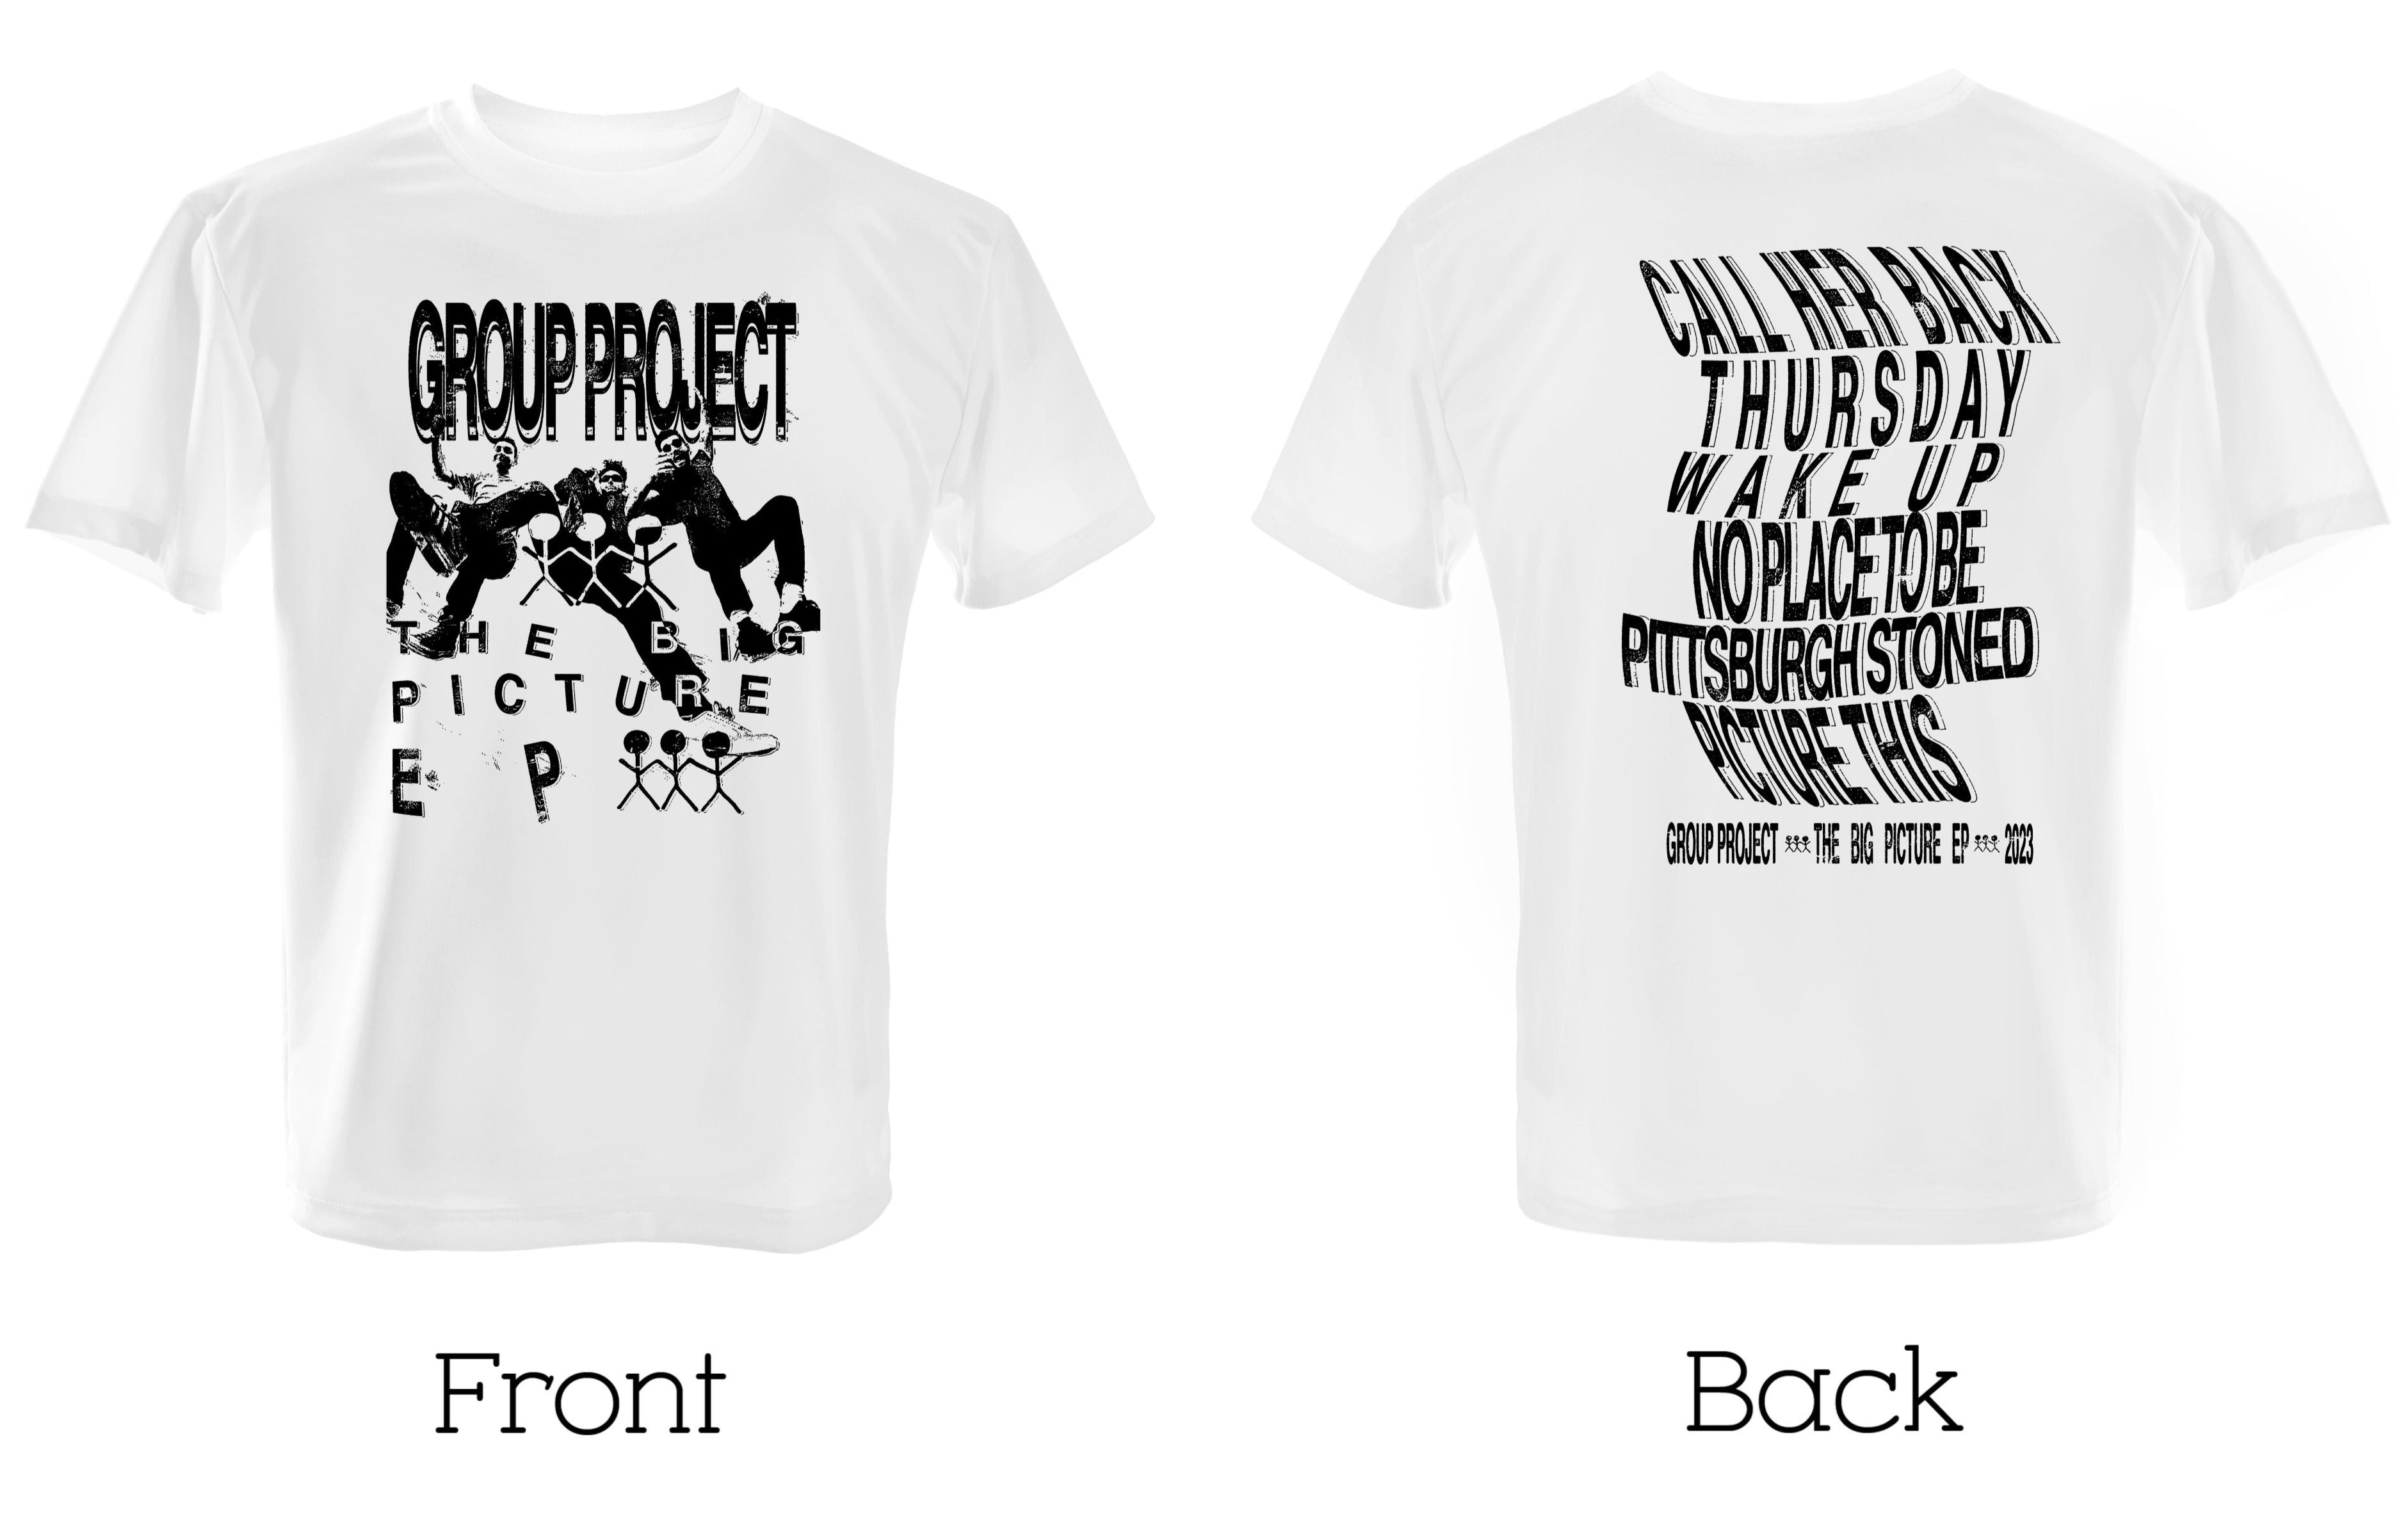 Group Project T-Shirt- Full Front & Back Print -EP Design - White